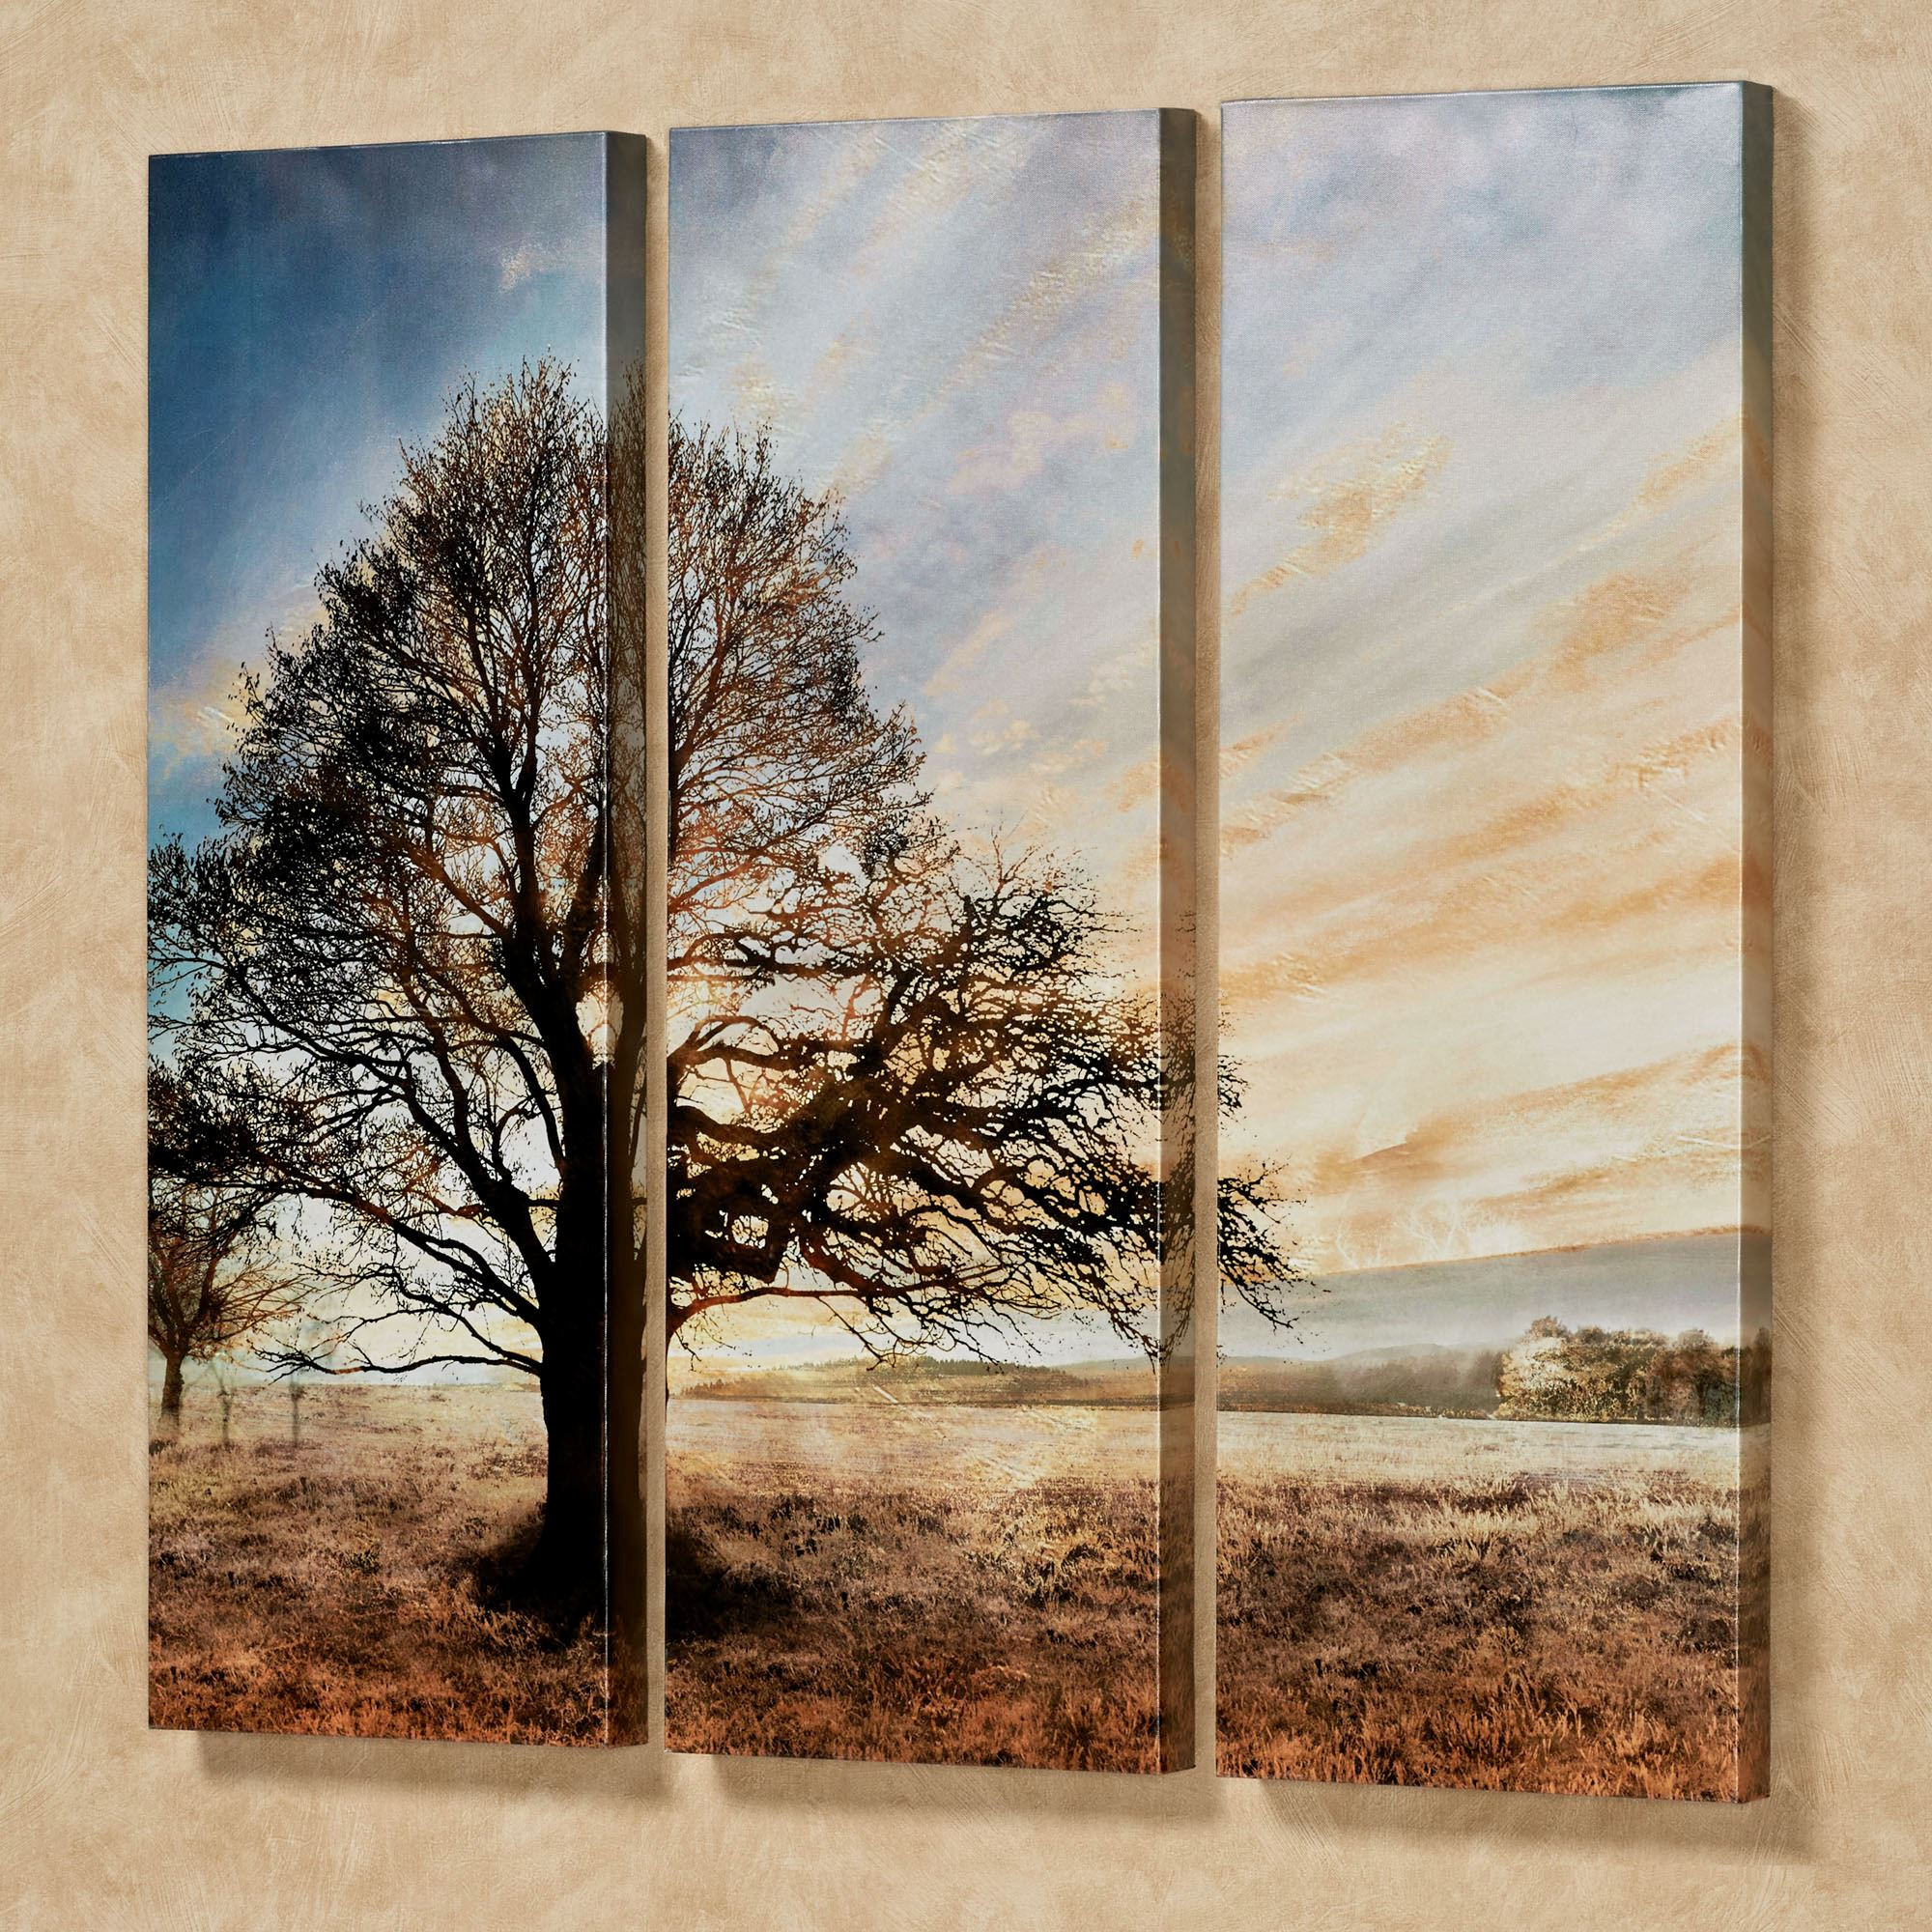 Best ideas about Triptych Wall Art . Save or Pin Illuminated Tree Triptych Canvas Wall Art Set Now.